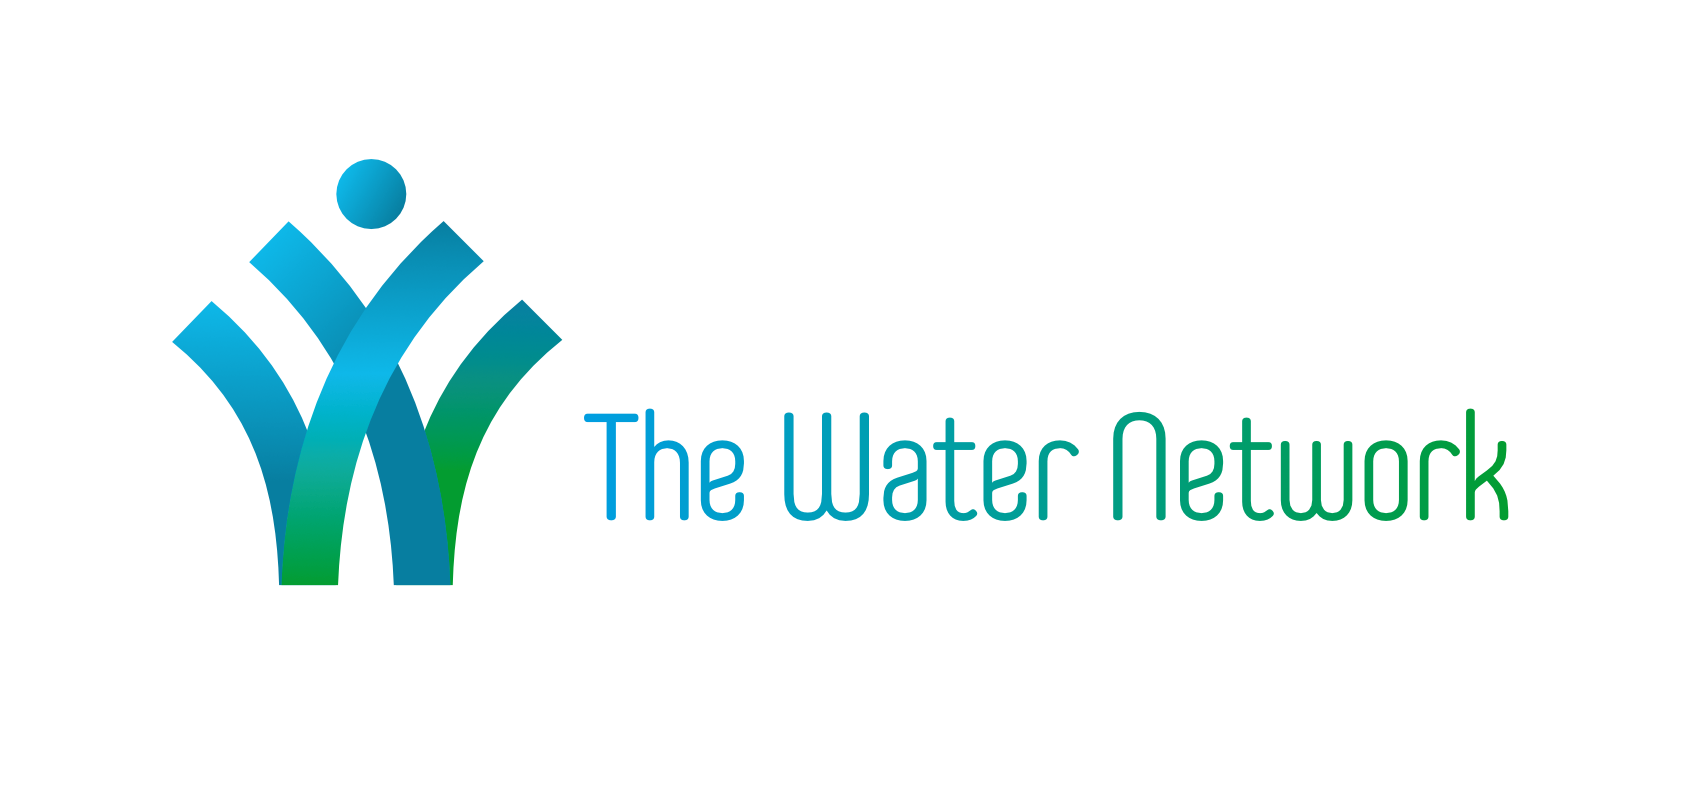 STAY TUNED! The Water Network is getting major upgrades! 1. MOBILE! We have been working for several months now on new native mobile apps with p...